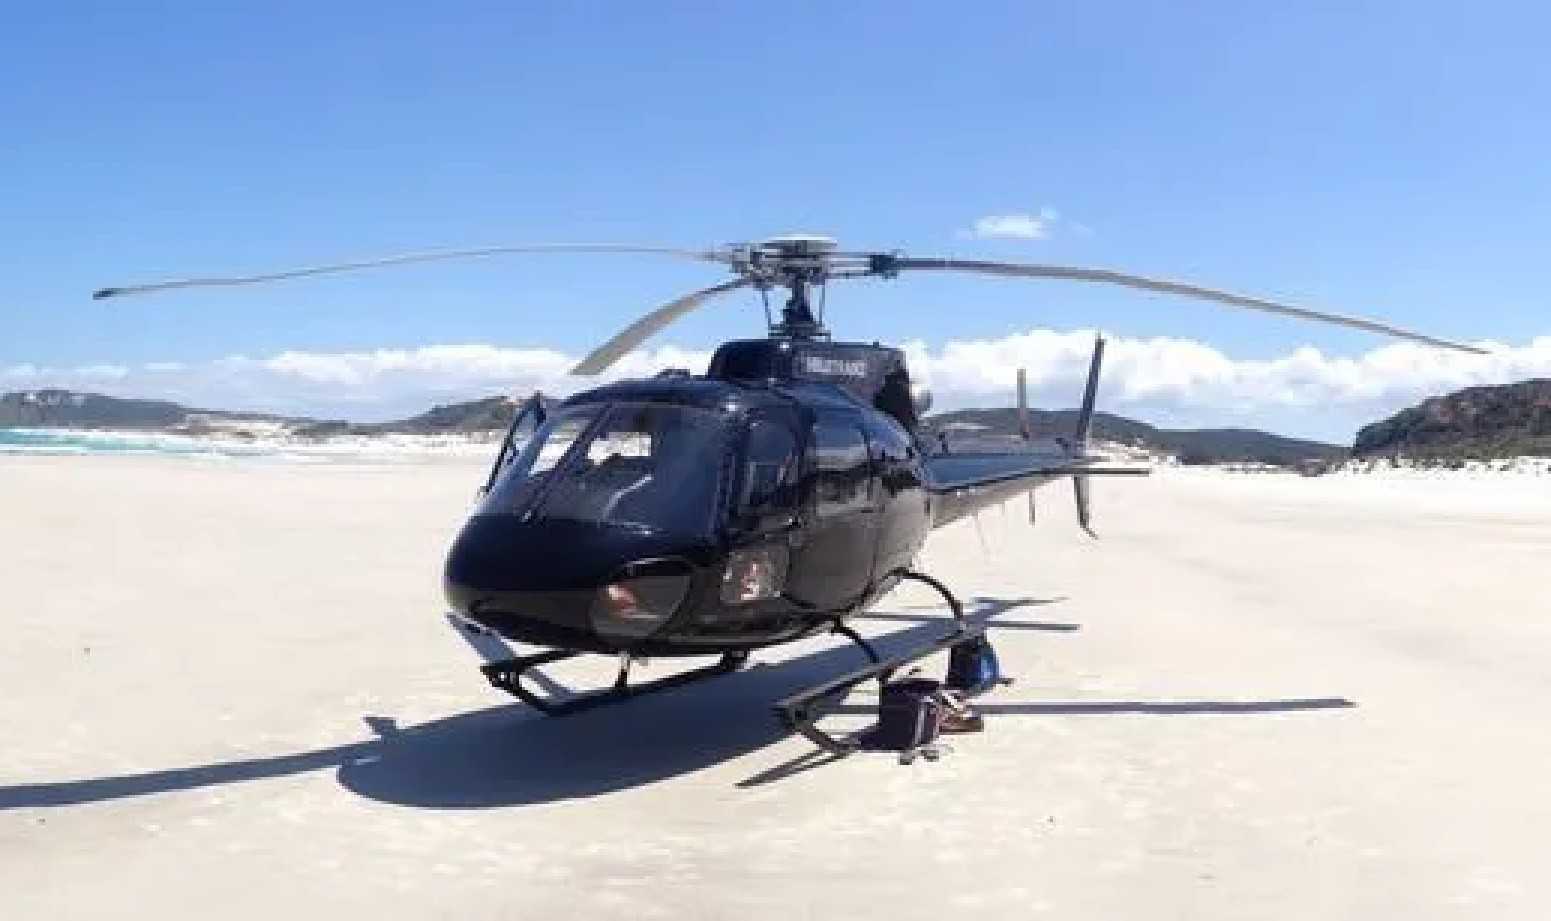 A Heletranz Helicopter on the beach